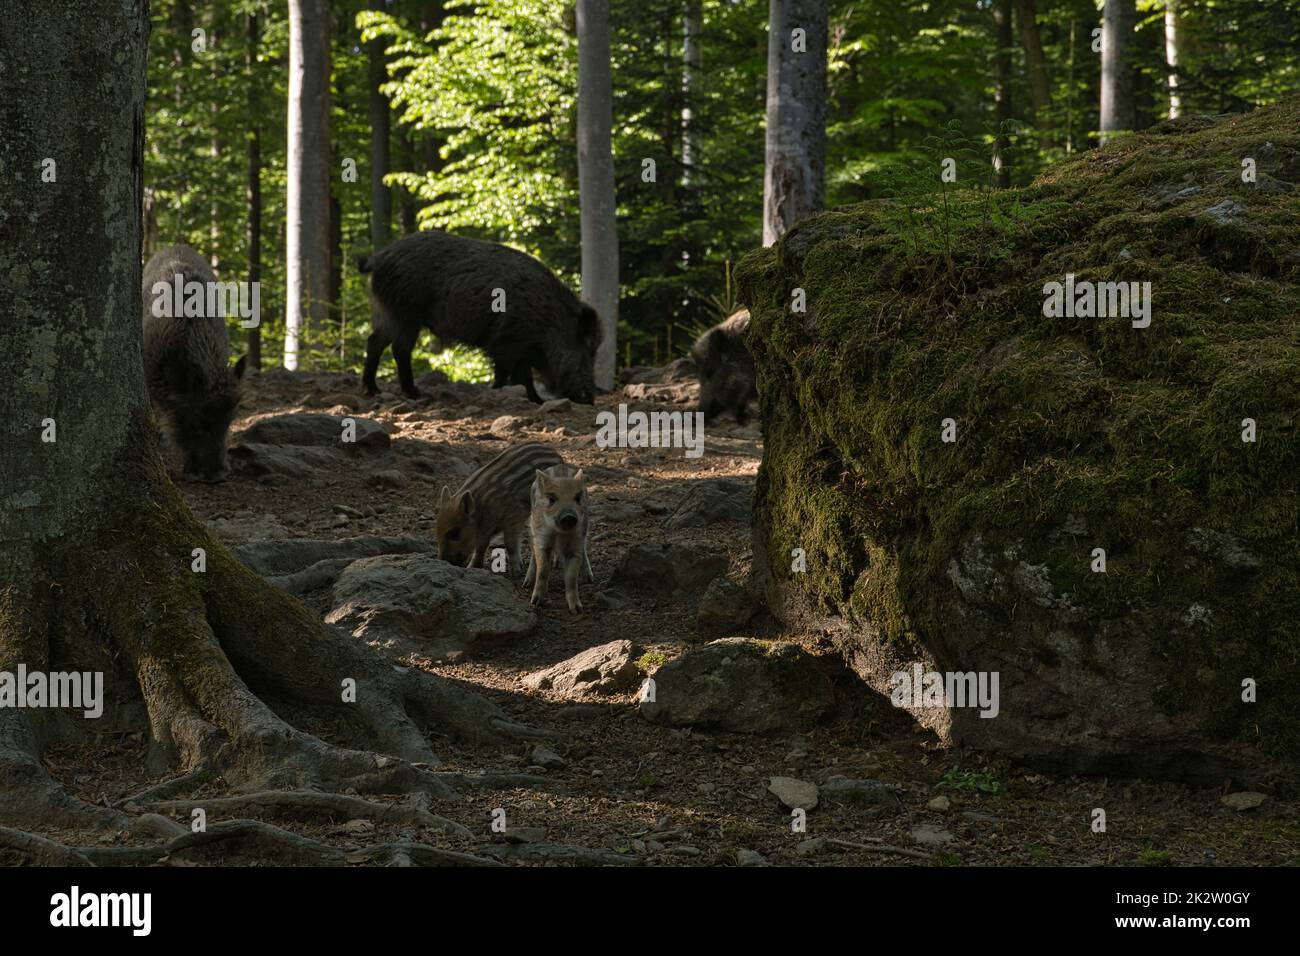 Two young wild boars in a forest clearing Stock Photo